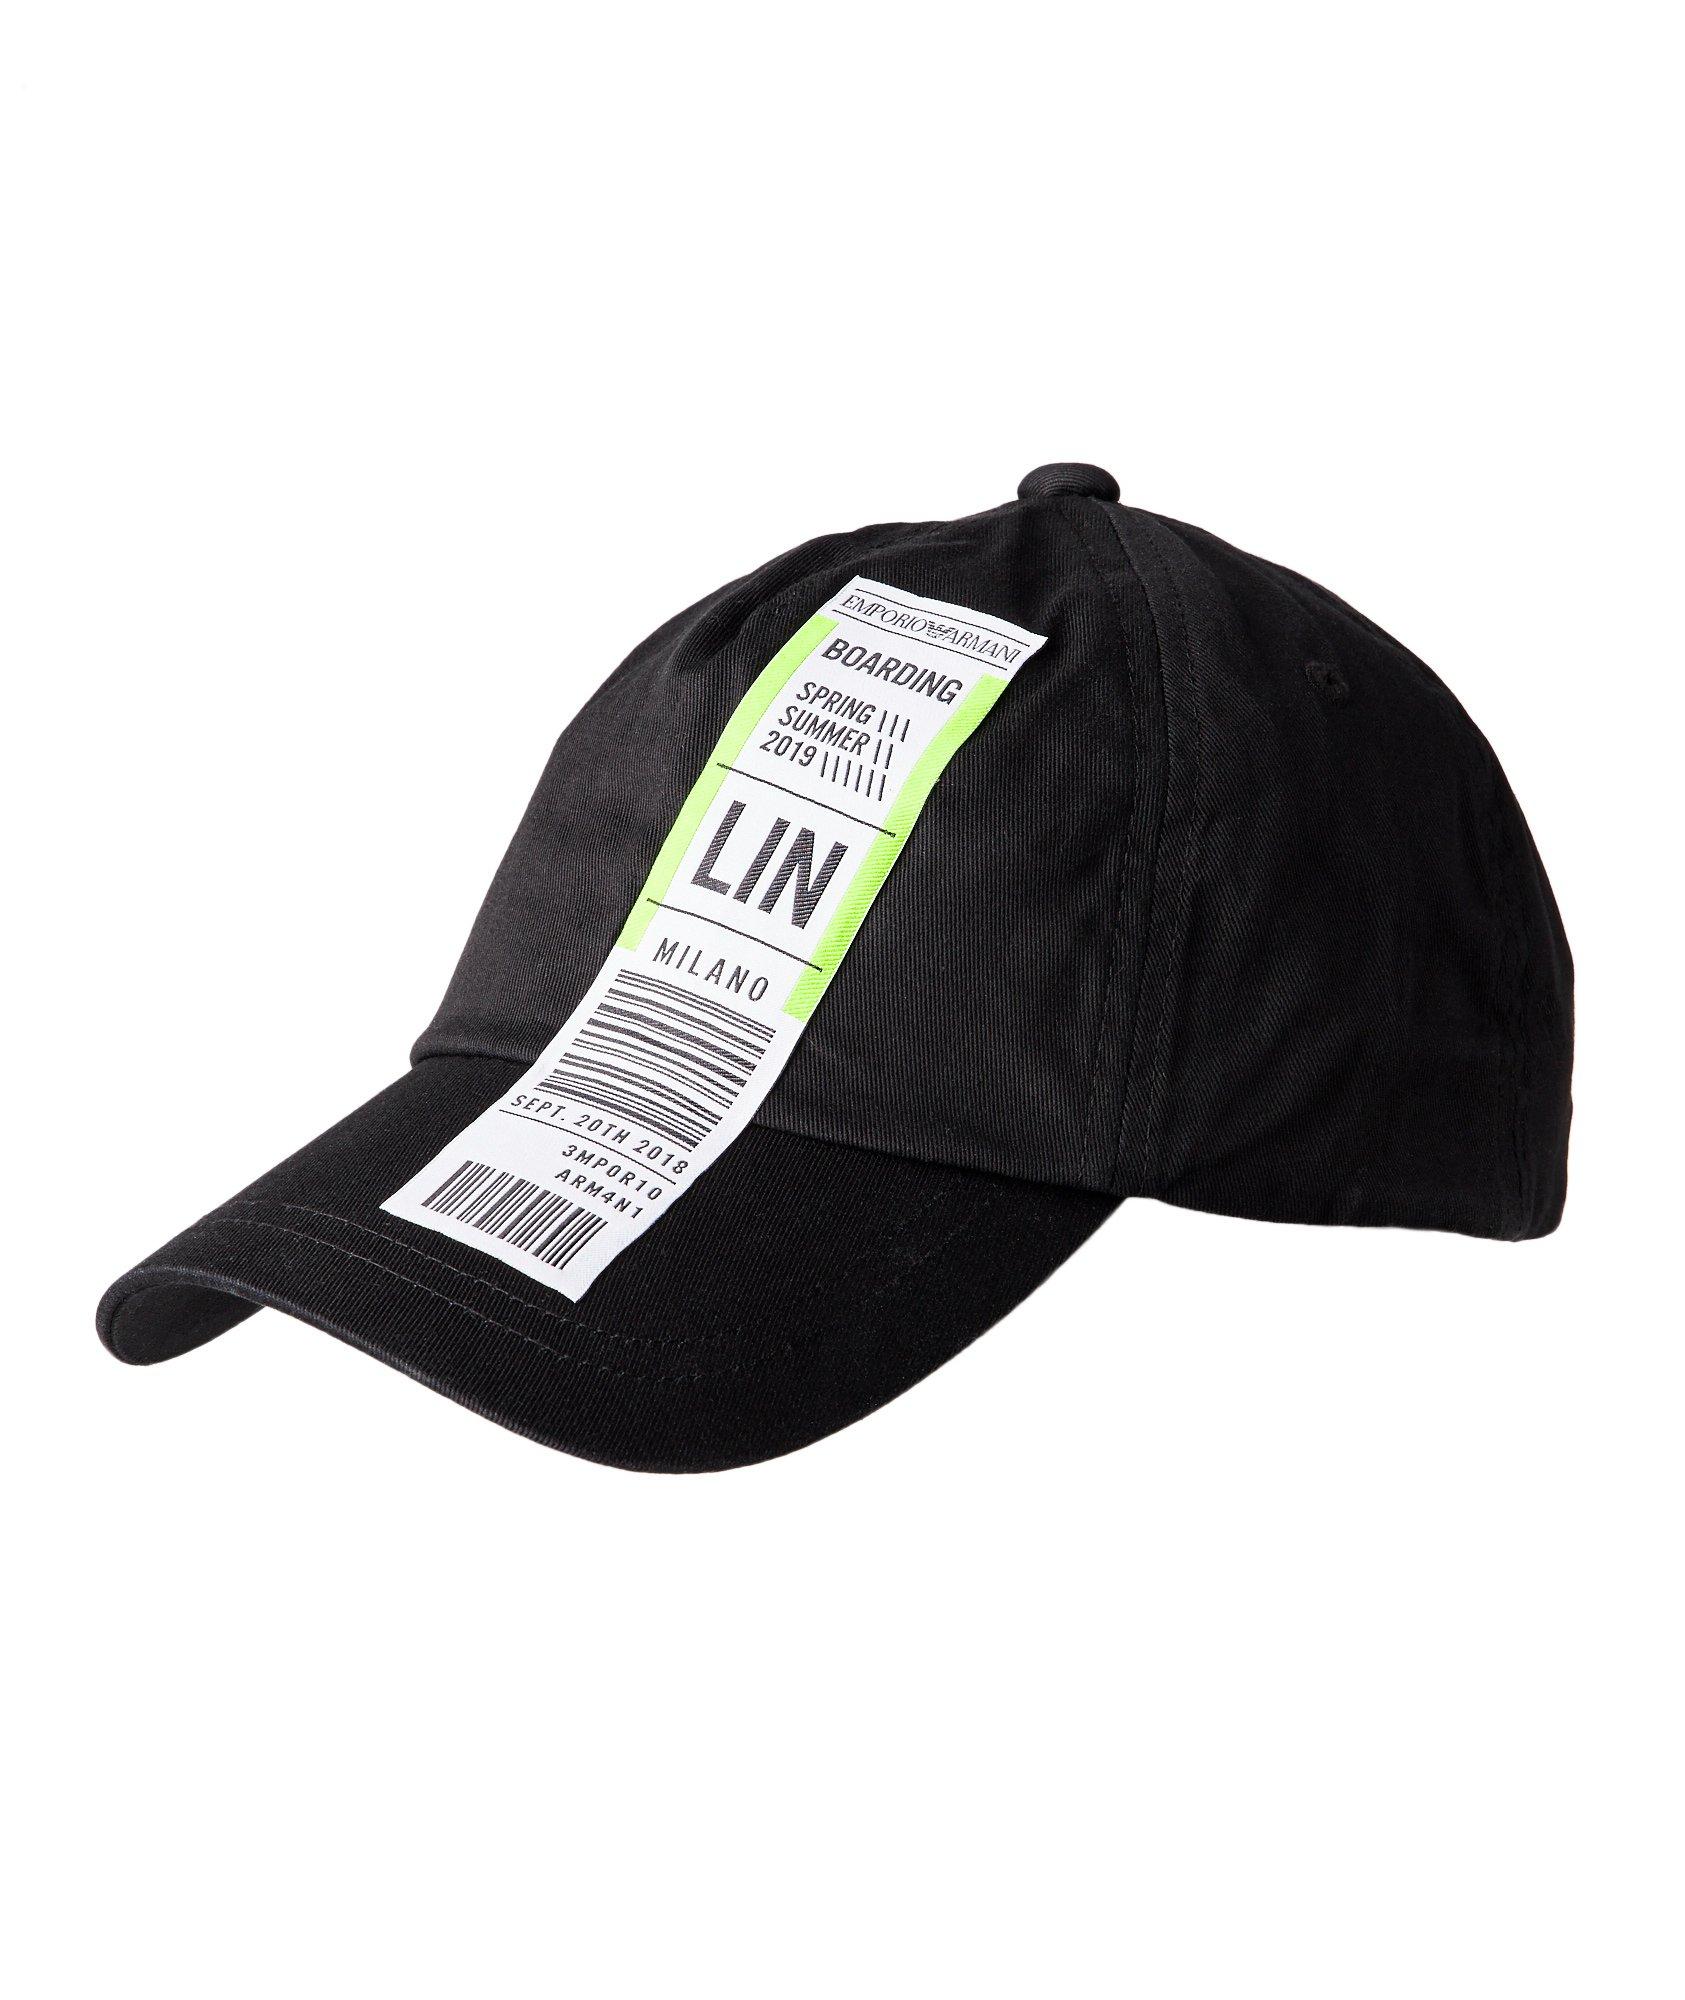 Casquette sport, collection Boarding image 0